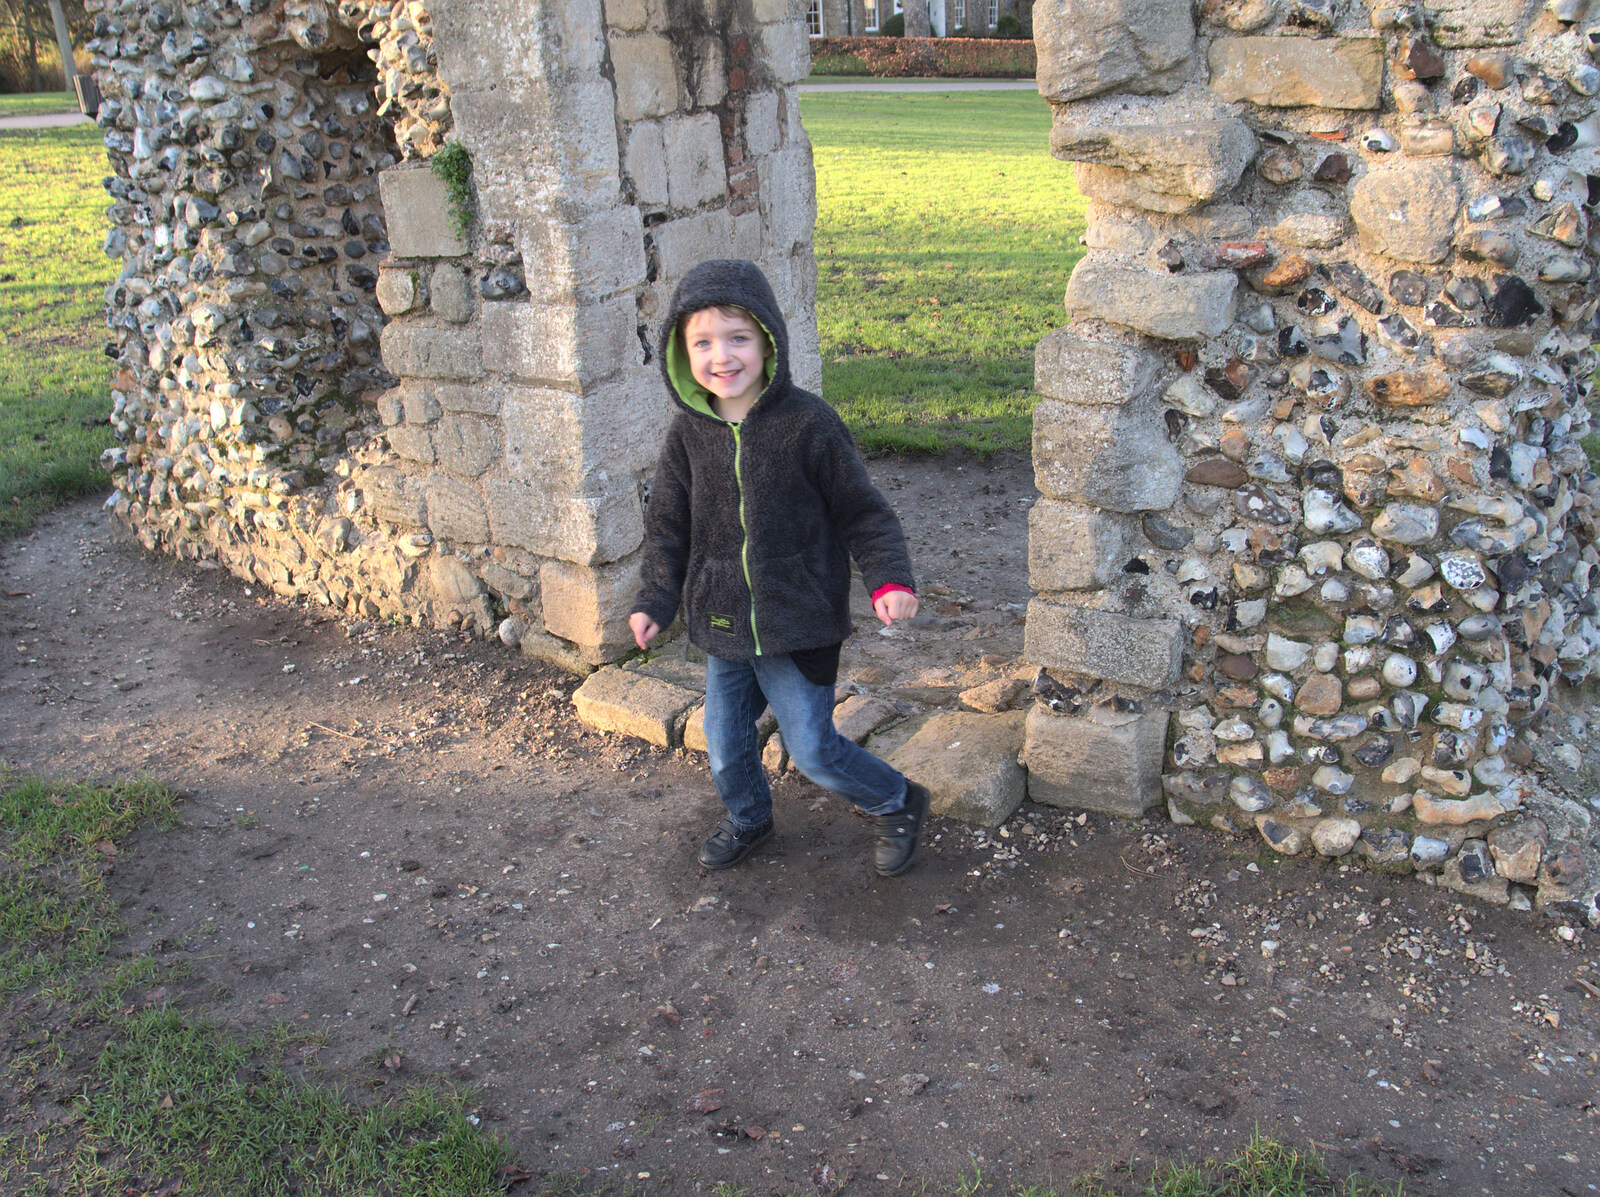 Fred jumps through a doorway from A Trip to Abbey Gardens, Bury St. Edmunds, Suffolk - 20th December 2014